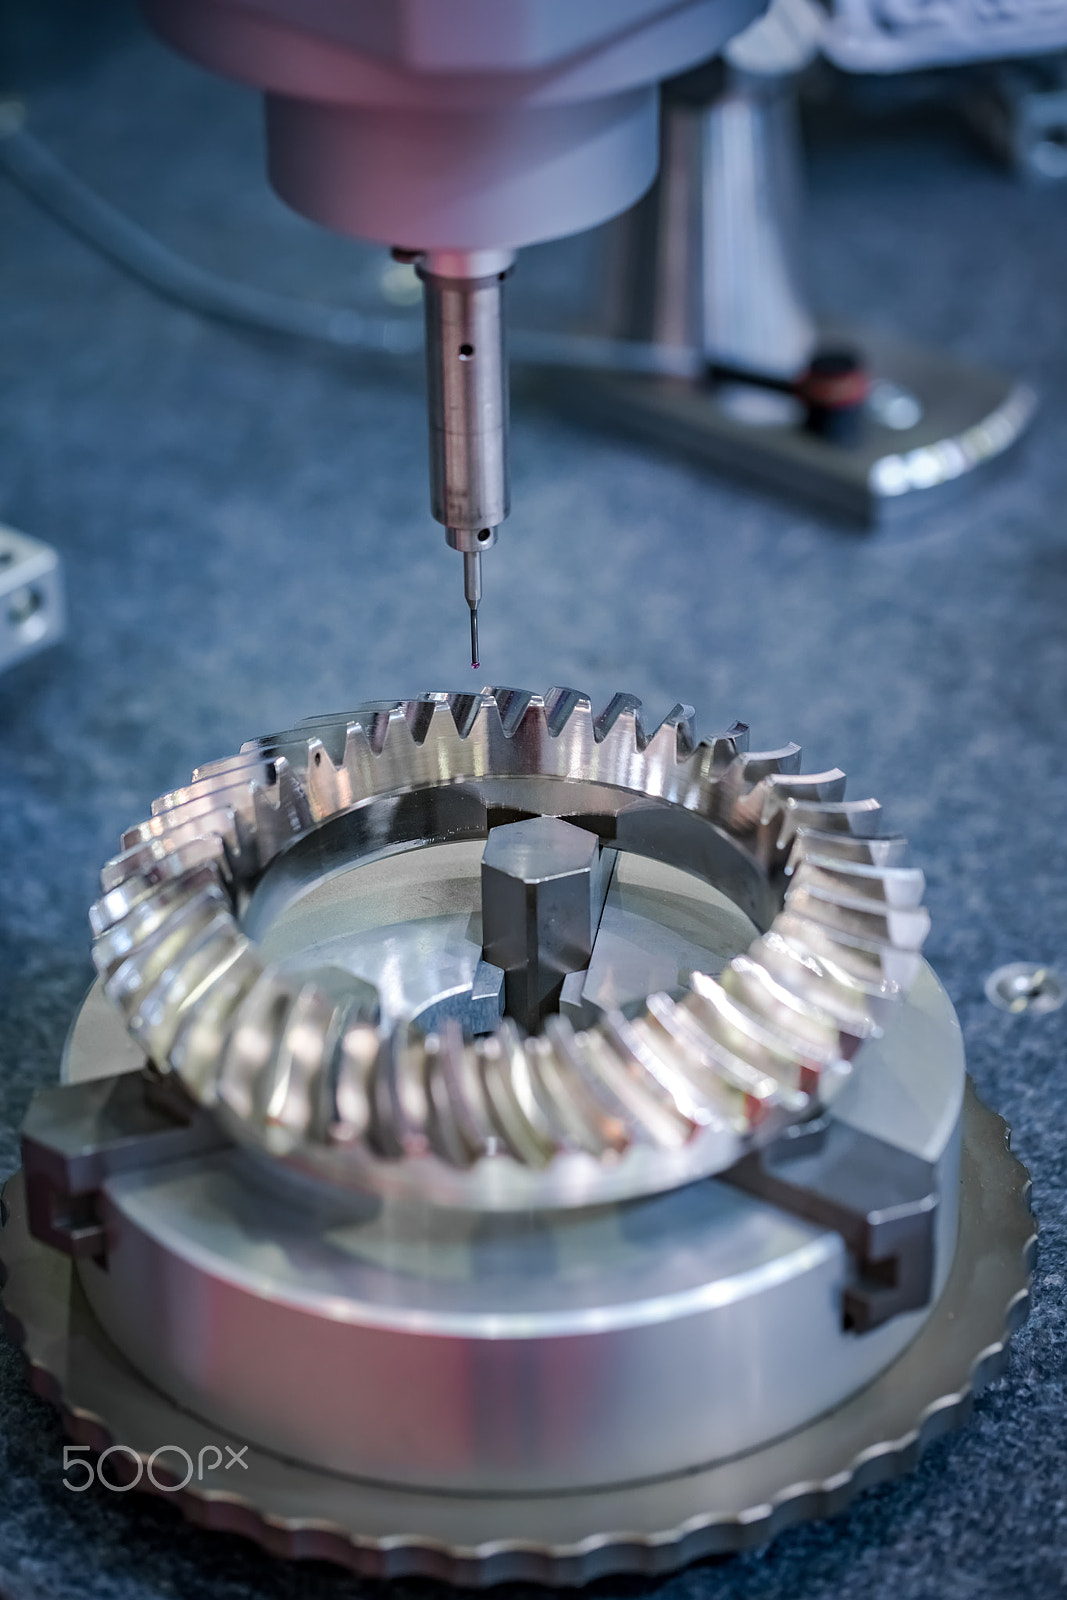 Sony a7R II + Canon EF 100mm F2.8L Macro IS USM sample photo. Metalworking cnc milling machine. photography